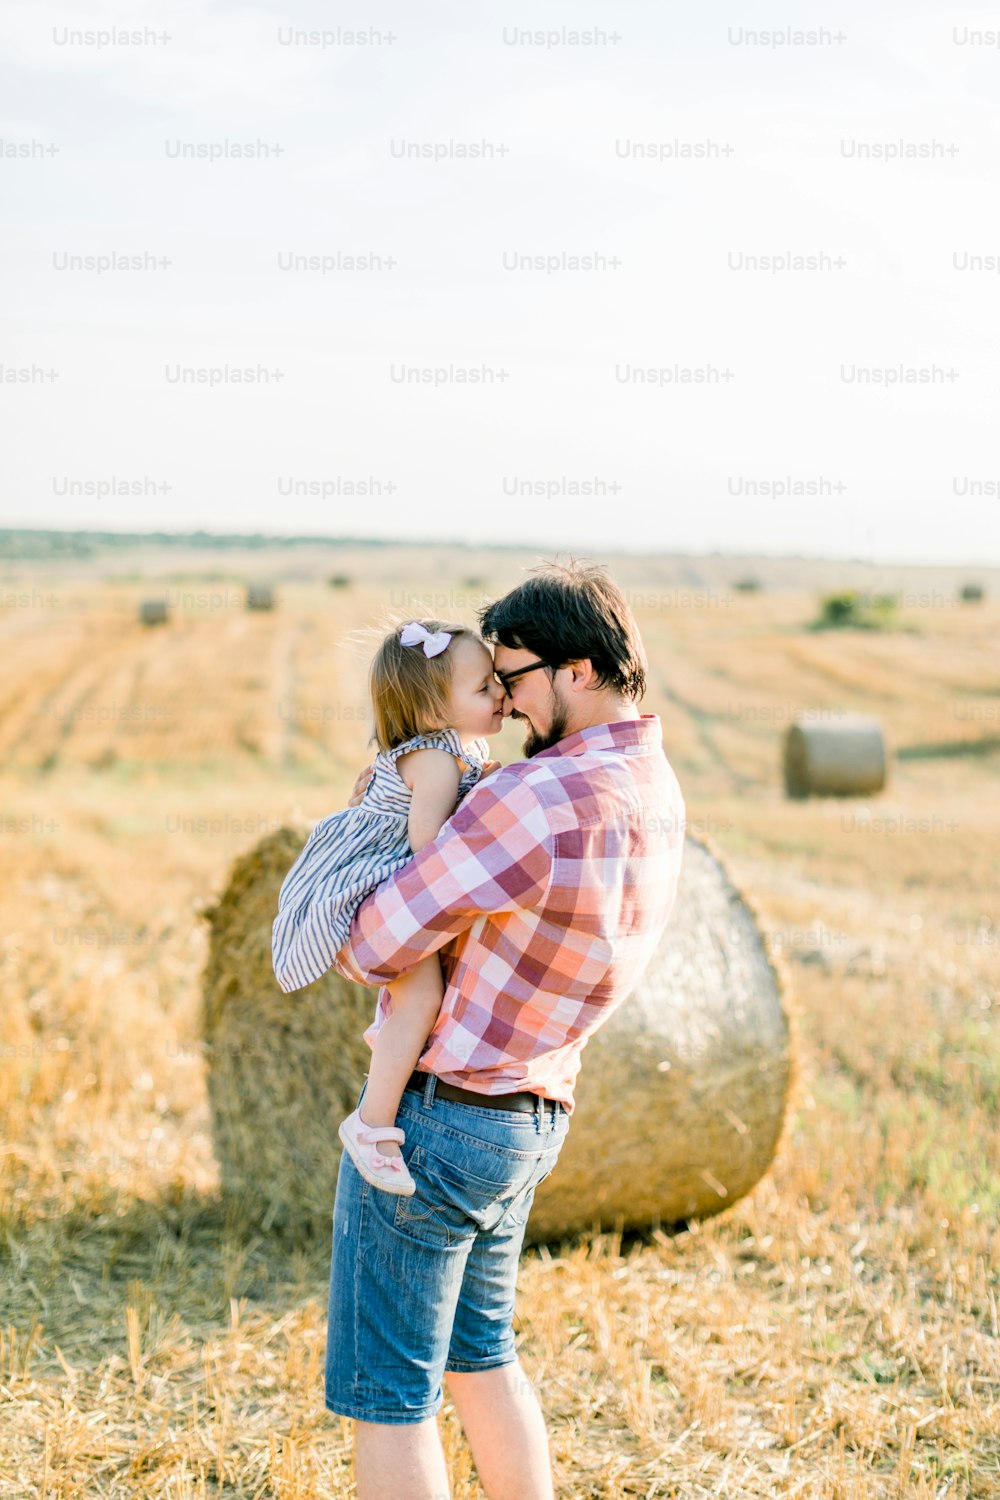 Happy joyful young father, handsome bearded man in jeans and checkered shirt, holding on hands his pretty little baby girl in dress, hugging and touching foreheads, walking in field next to hay bales.